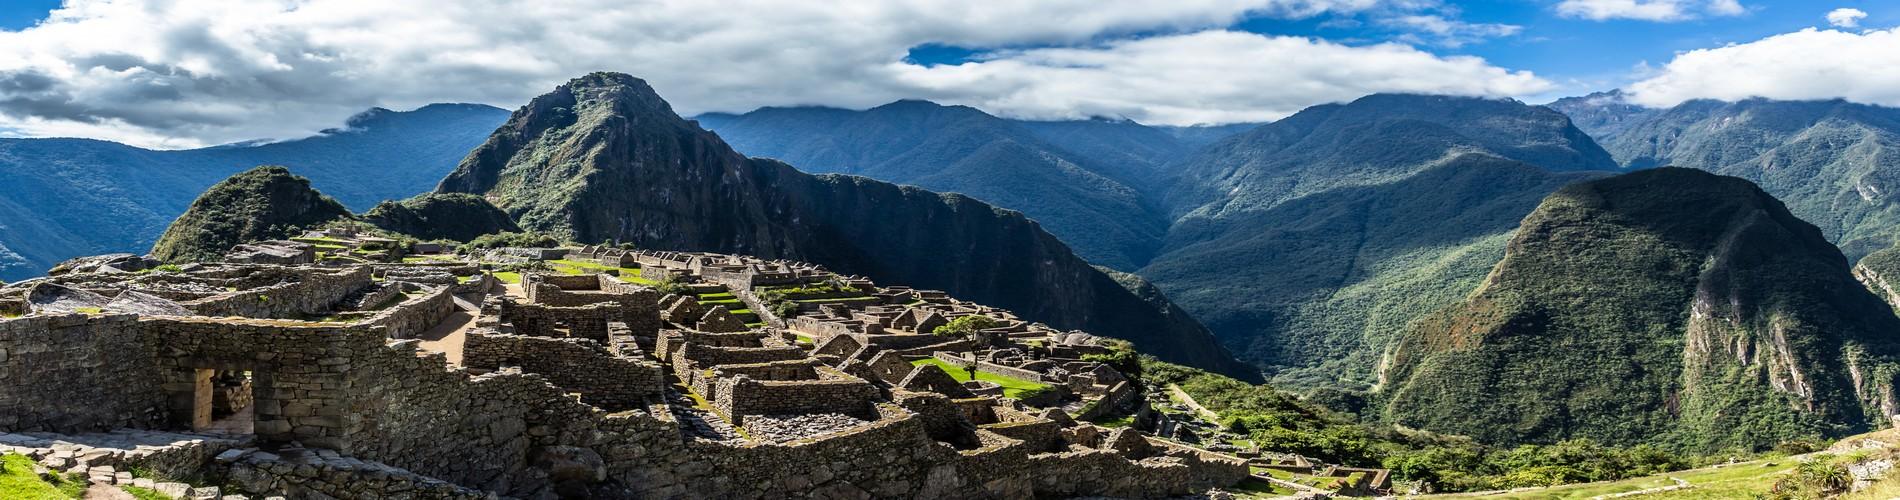 HOW TO GET FROM CUSCO TO MACHU PICCHU